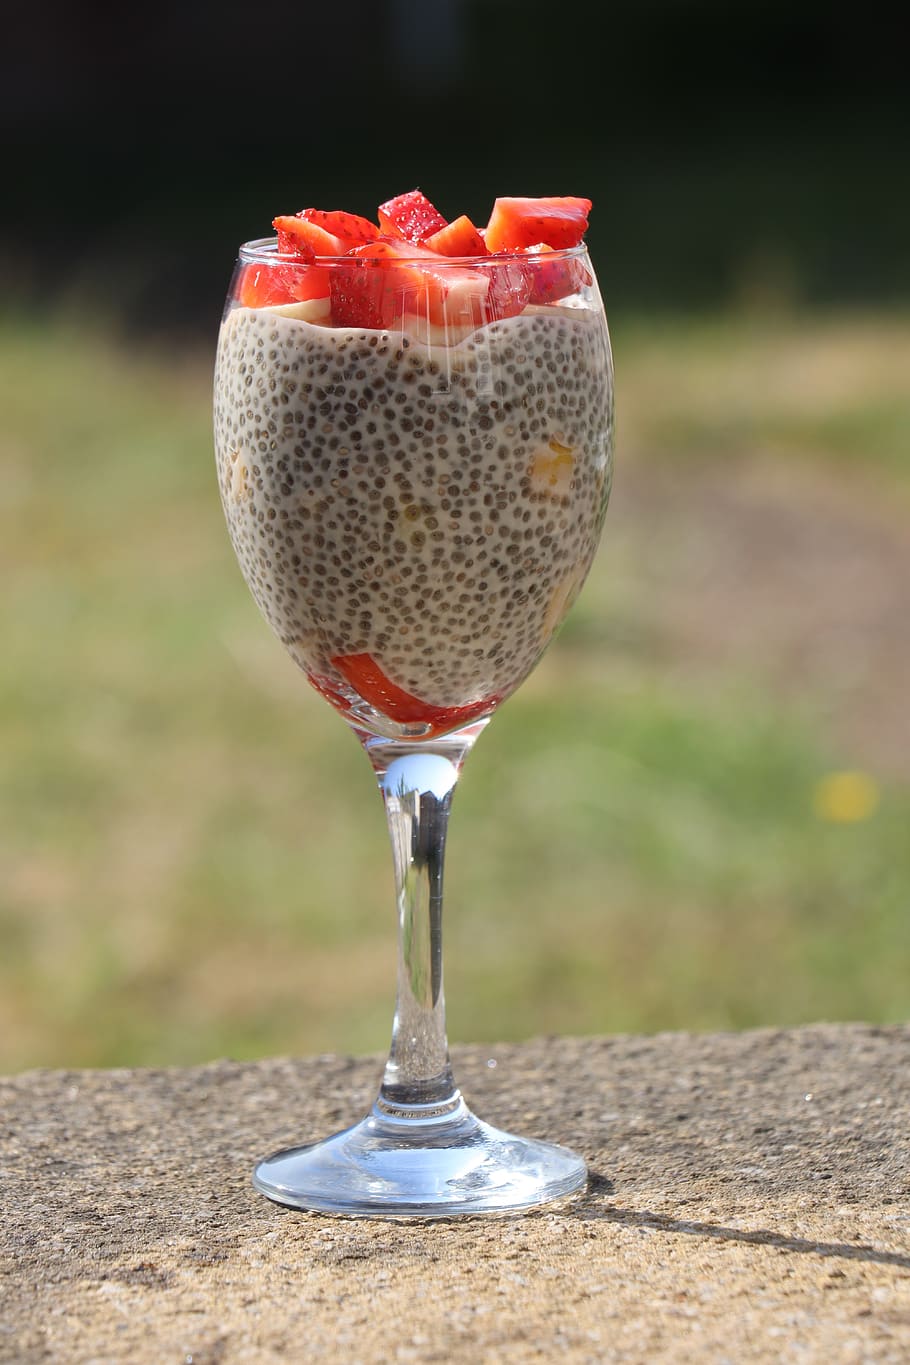 chia seeds, chia seed pudding, dieting, fresh, fruit, breakfast